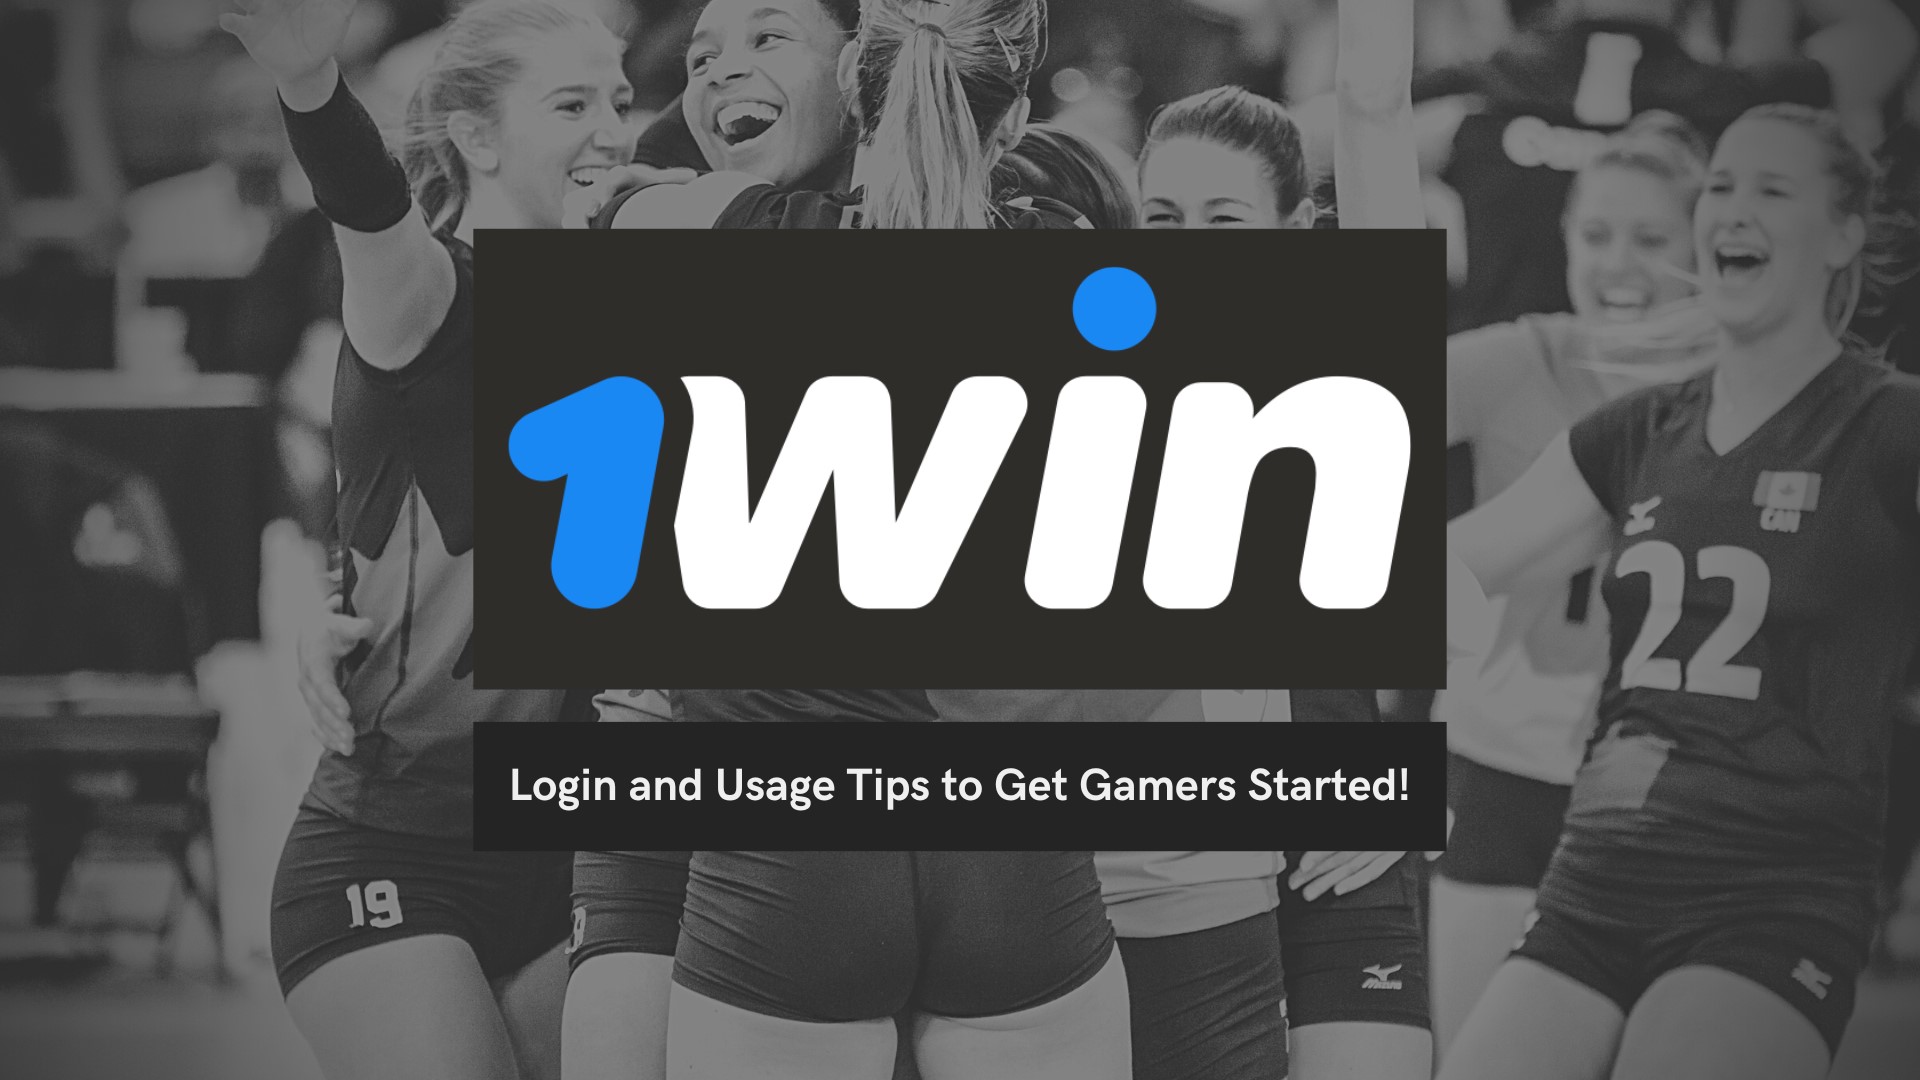 1Win Login and Usage Tips to Get Gamers Started with the 1Win App